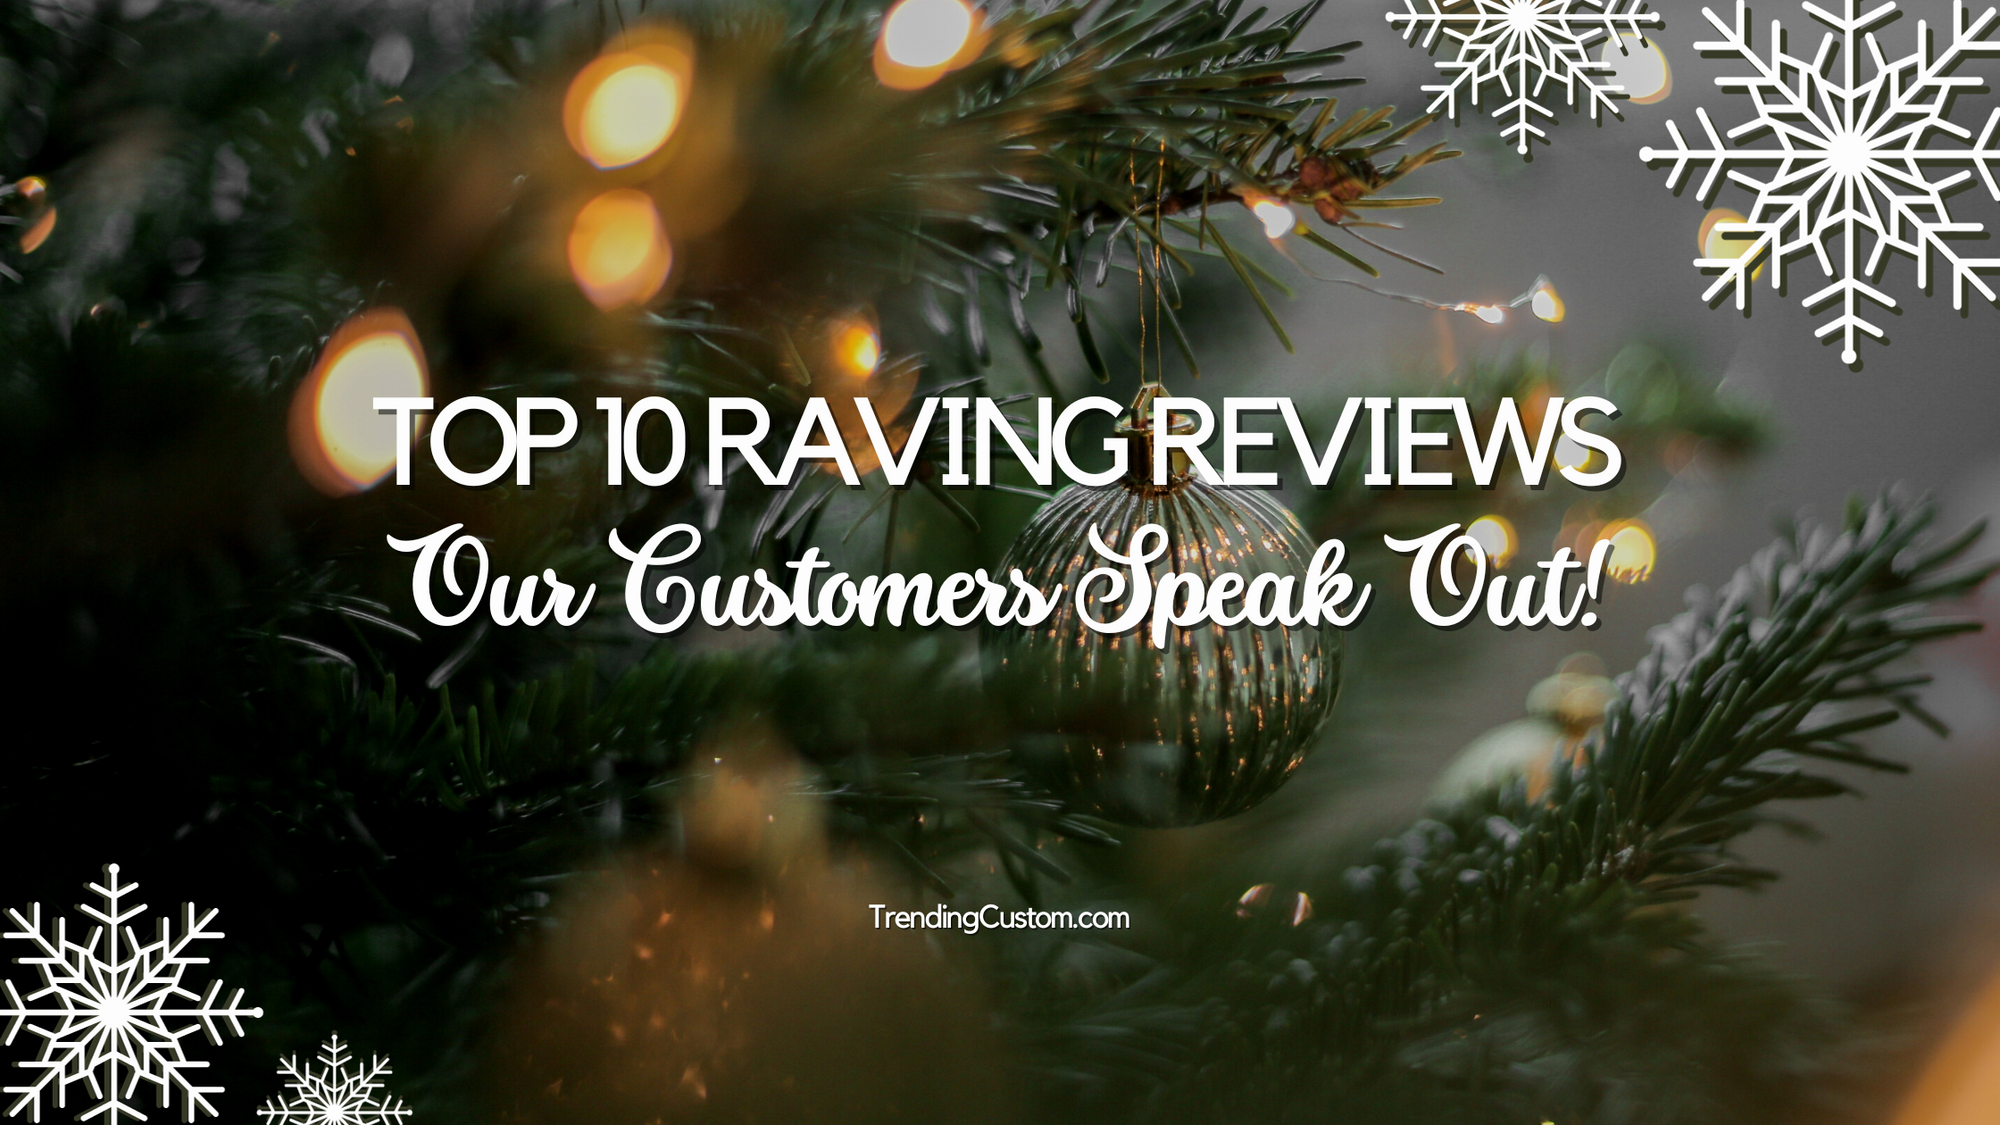 Top 10 Raving Reviews: Our Customers Speak Out! - October 21th